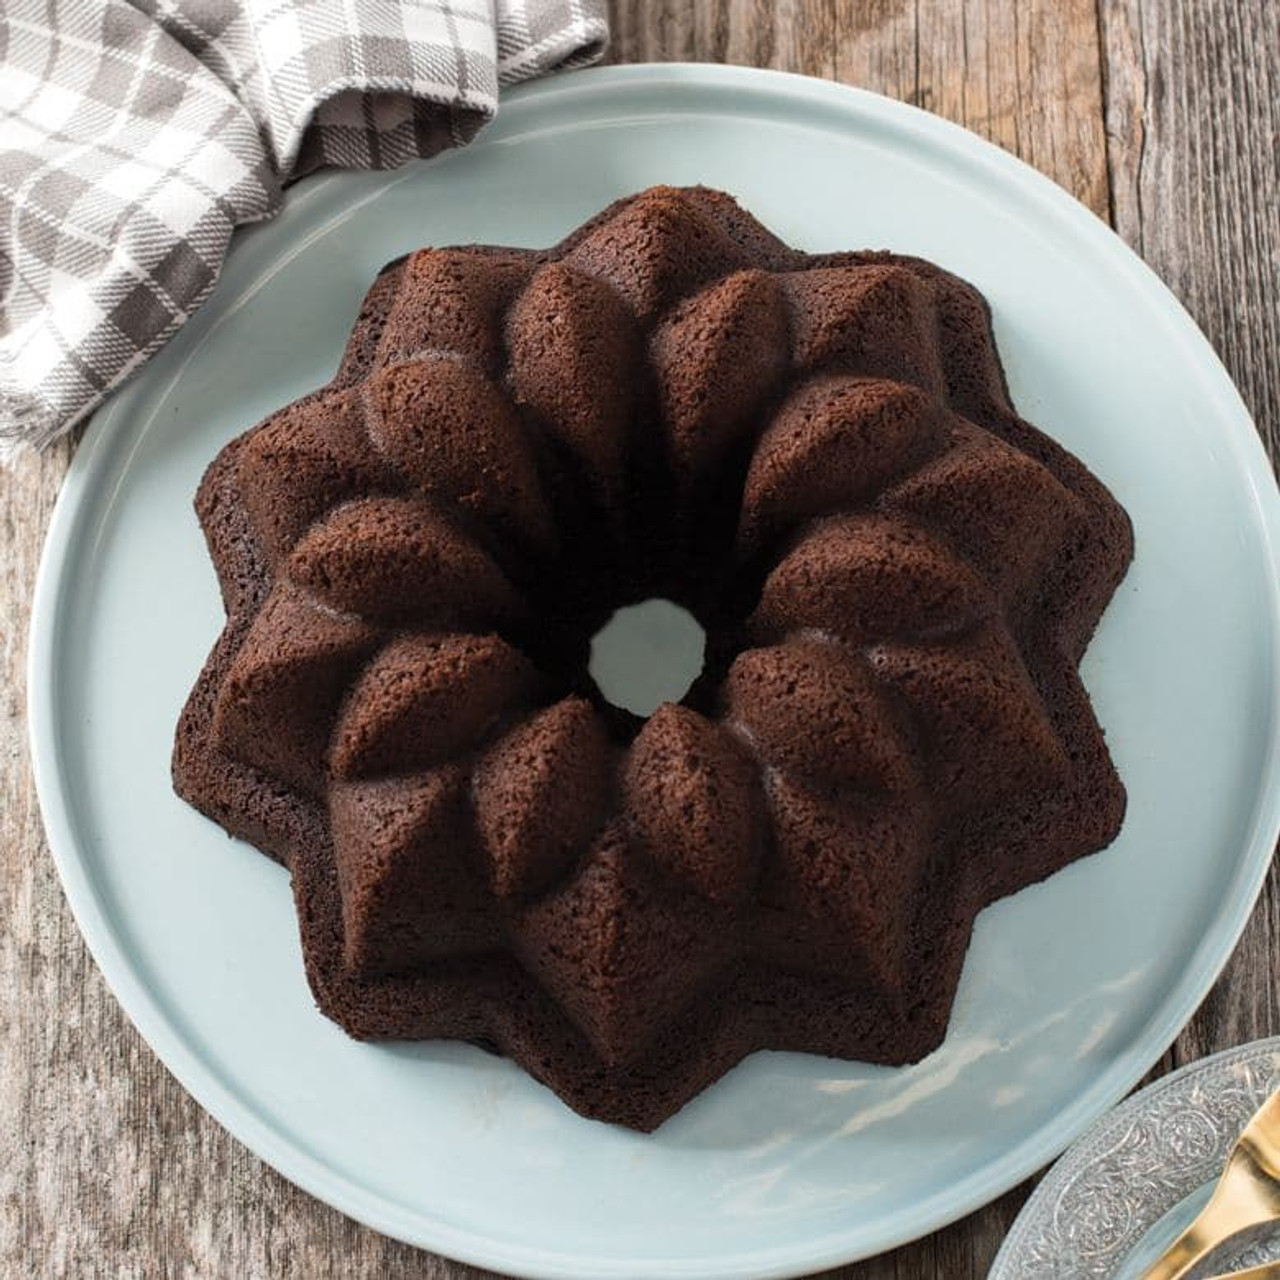 https://cdn11.bigcommerce.com/s-hccytny0od/images/stencil/1280x1280/products/752/3889/nordic-ware-vintage-star-bundt-pan-1__19708.1514551504.jpg?c=2?imbypass=on